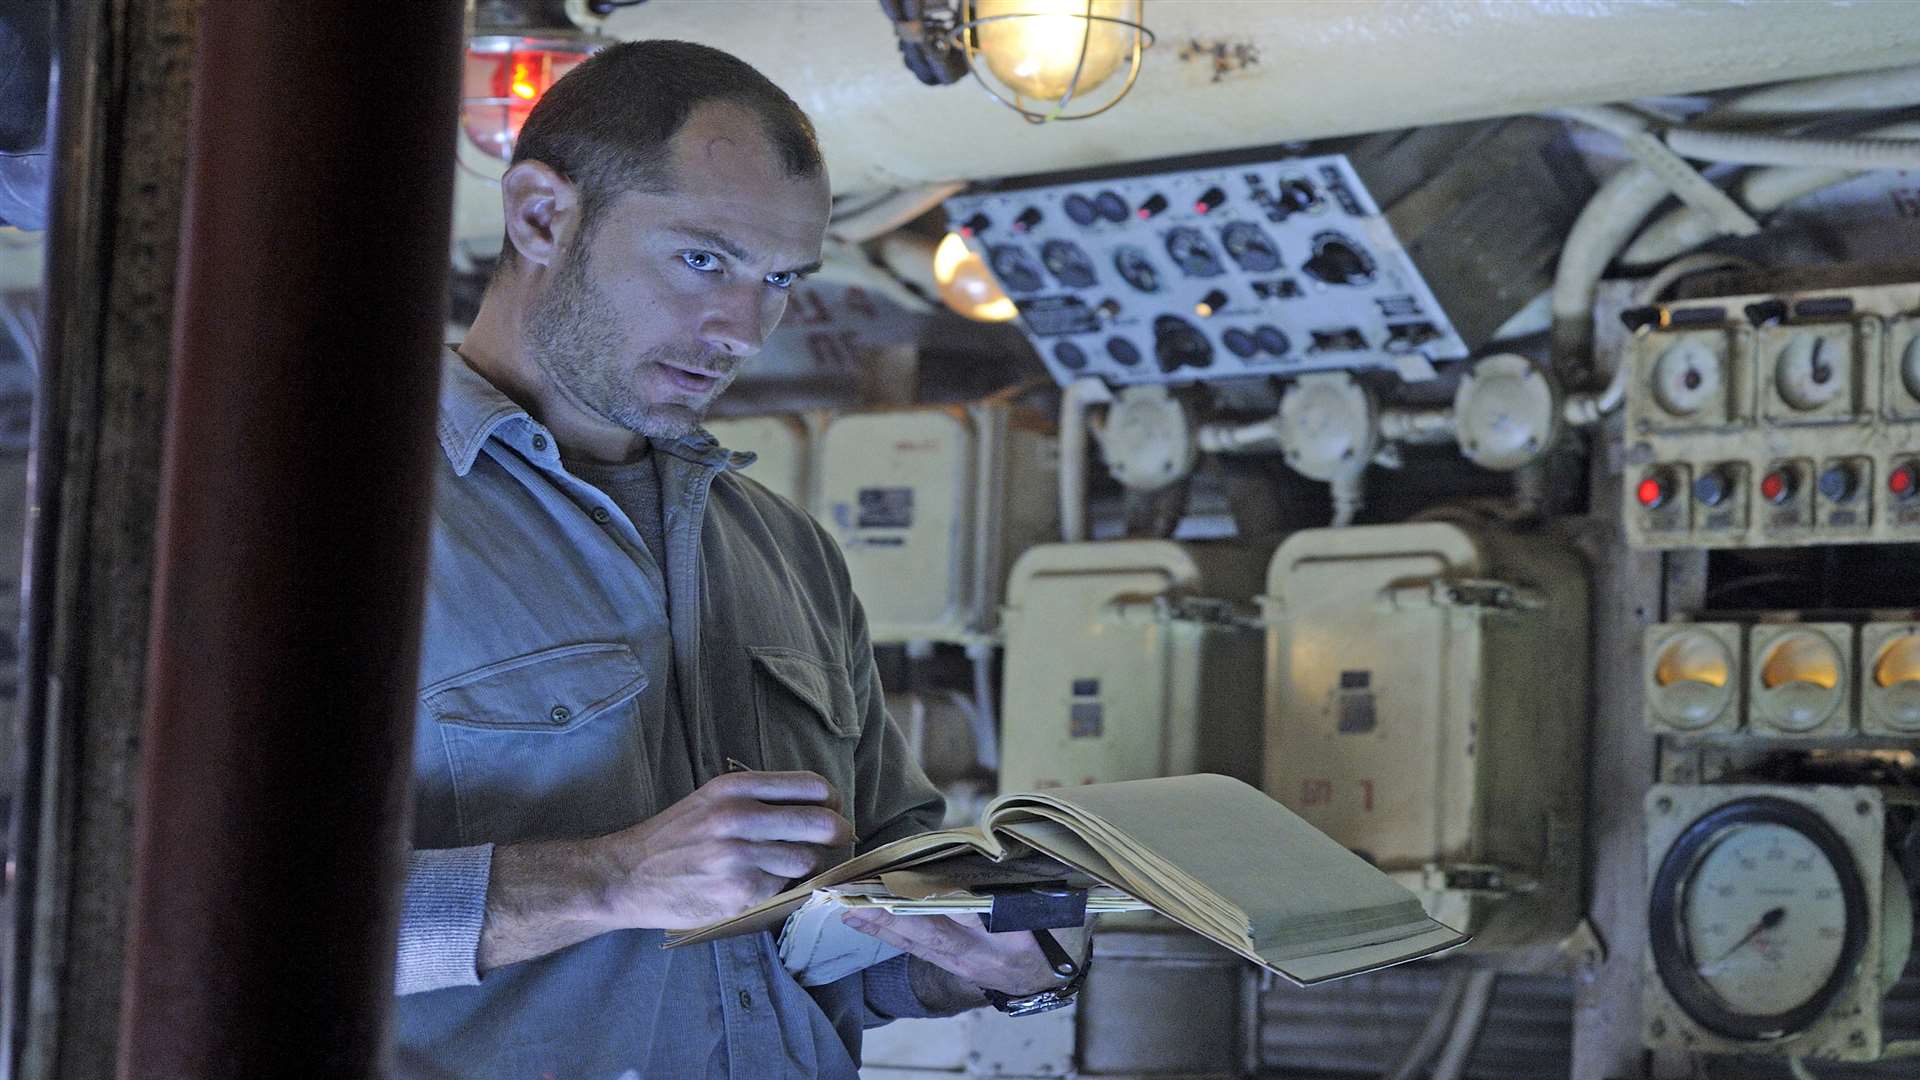 Jude Law in Black Sea, filmed in a Russian submarine on the River Medway